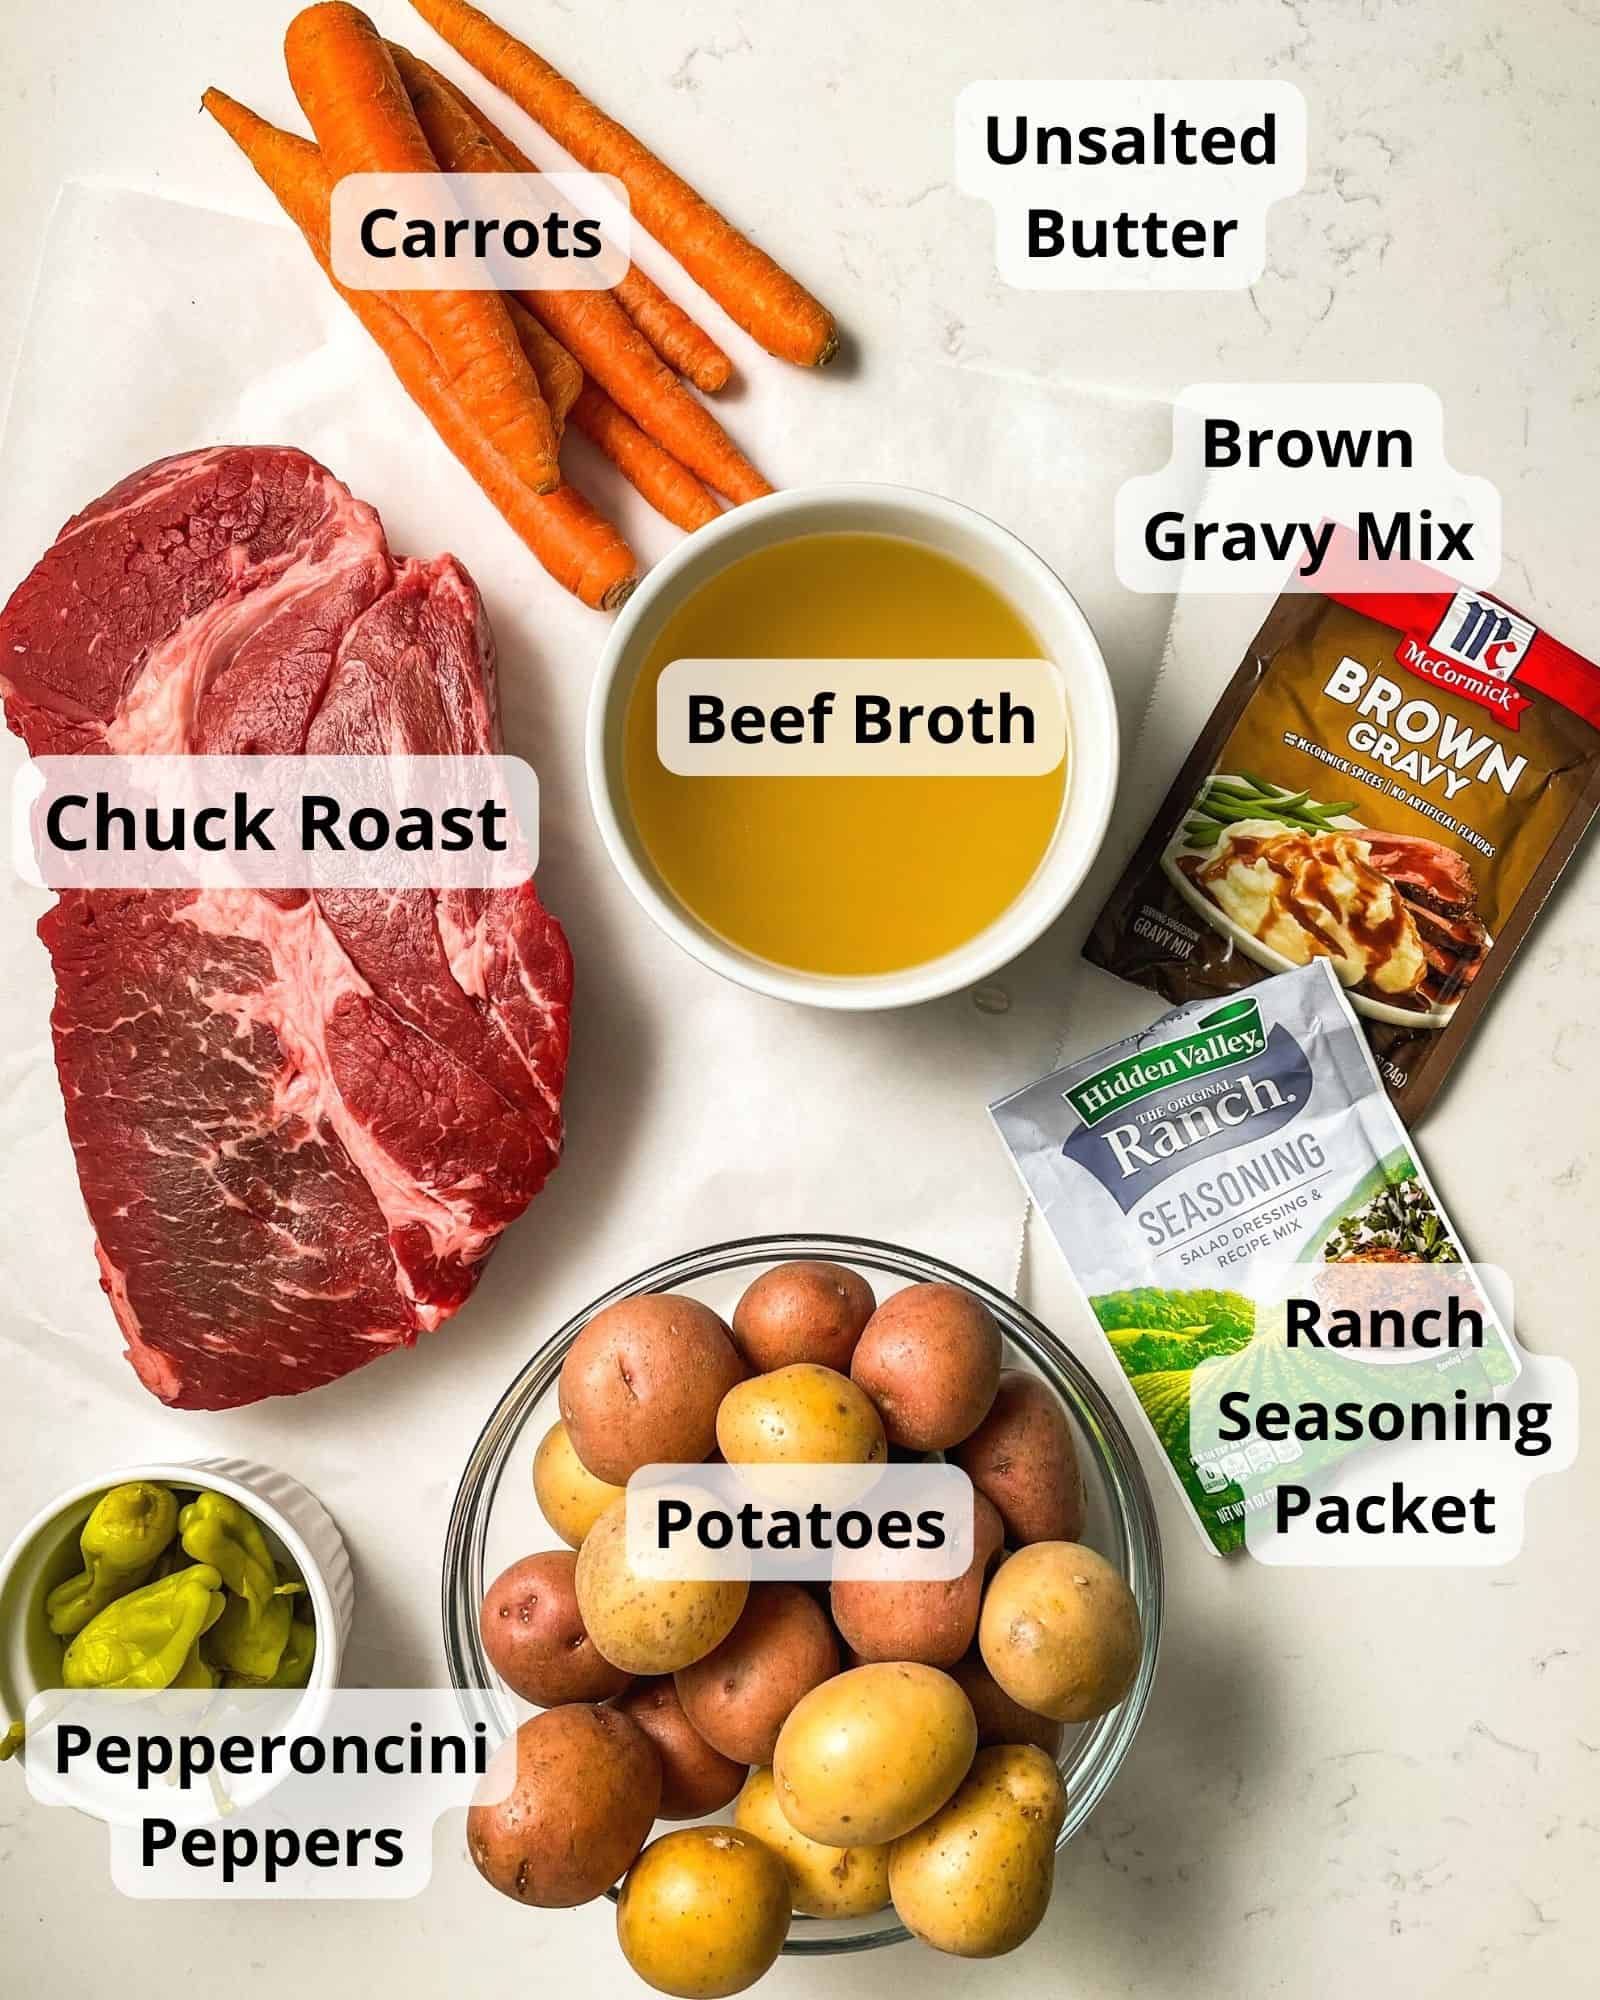 ingredients to make mississippi pot roast - chuck roast, beef broth, carrots, butter, brown gravy mix, ranch mix, pepperoncini peppers, and potatoes.